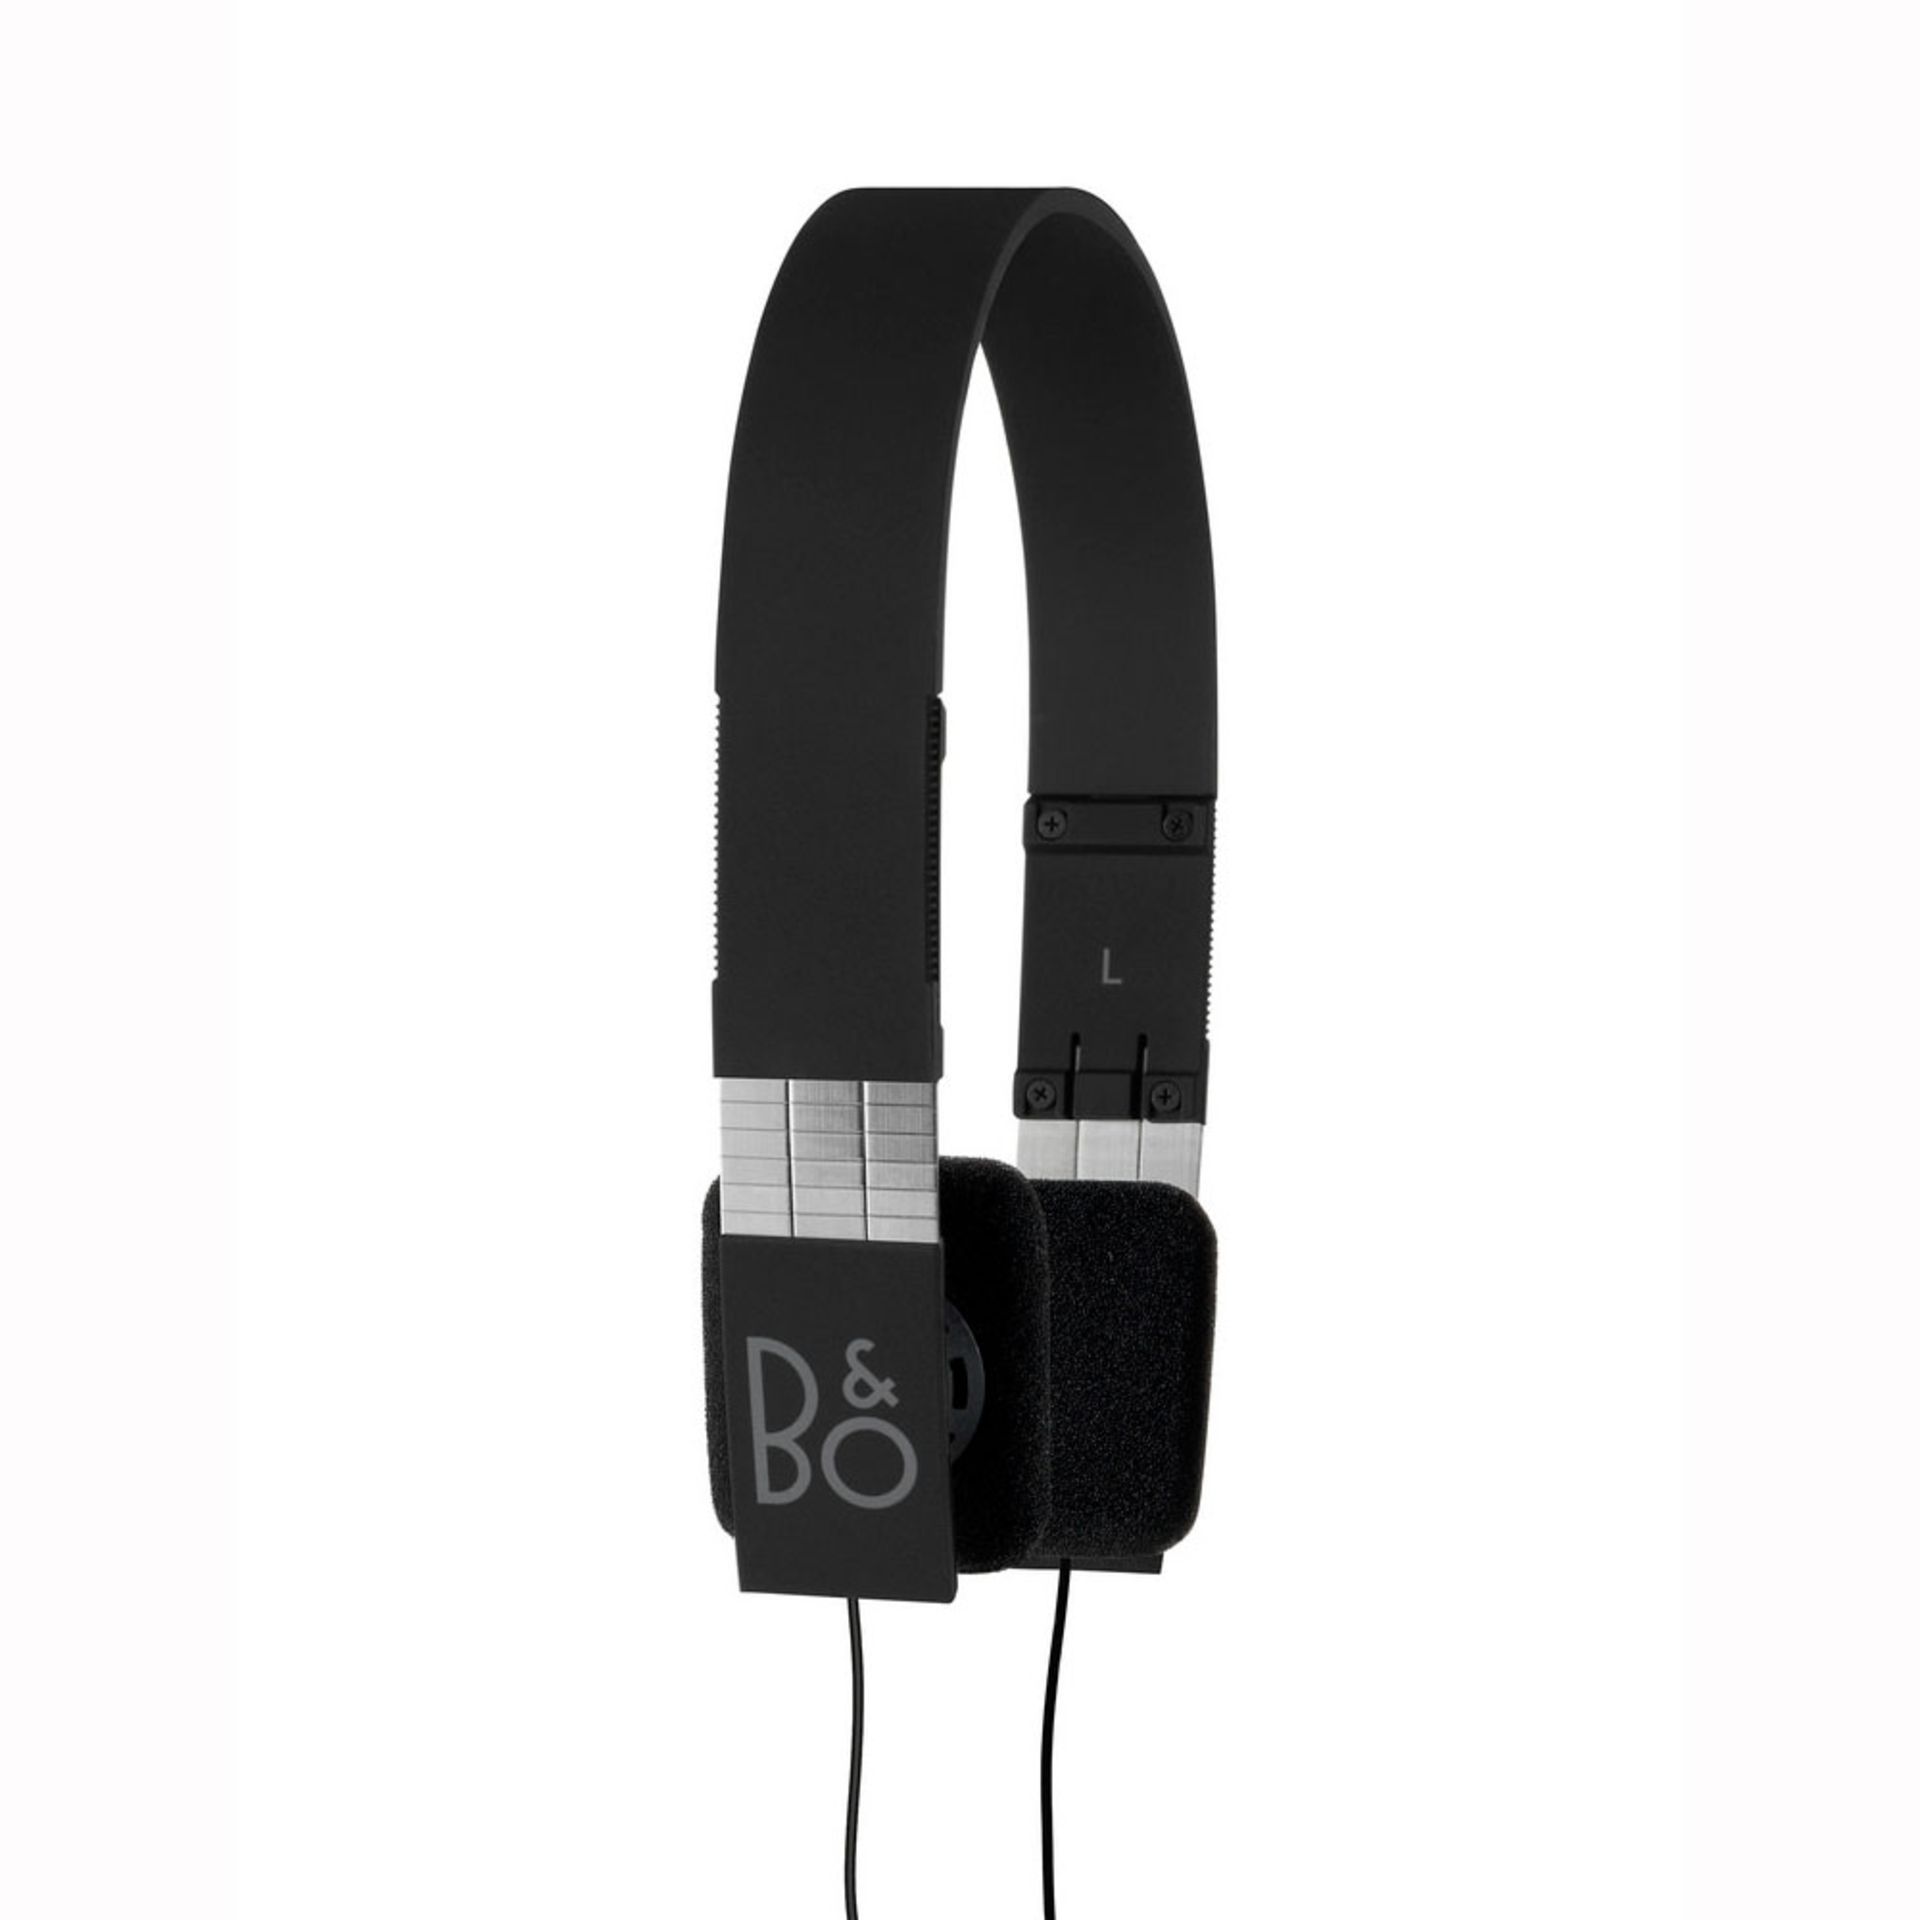 V Brand New Bang & Olufsen Form 2i Headphones With Inline Remote/Microphone - Ultra Light Design